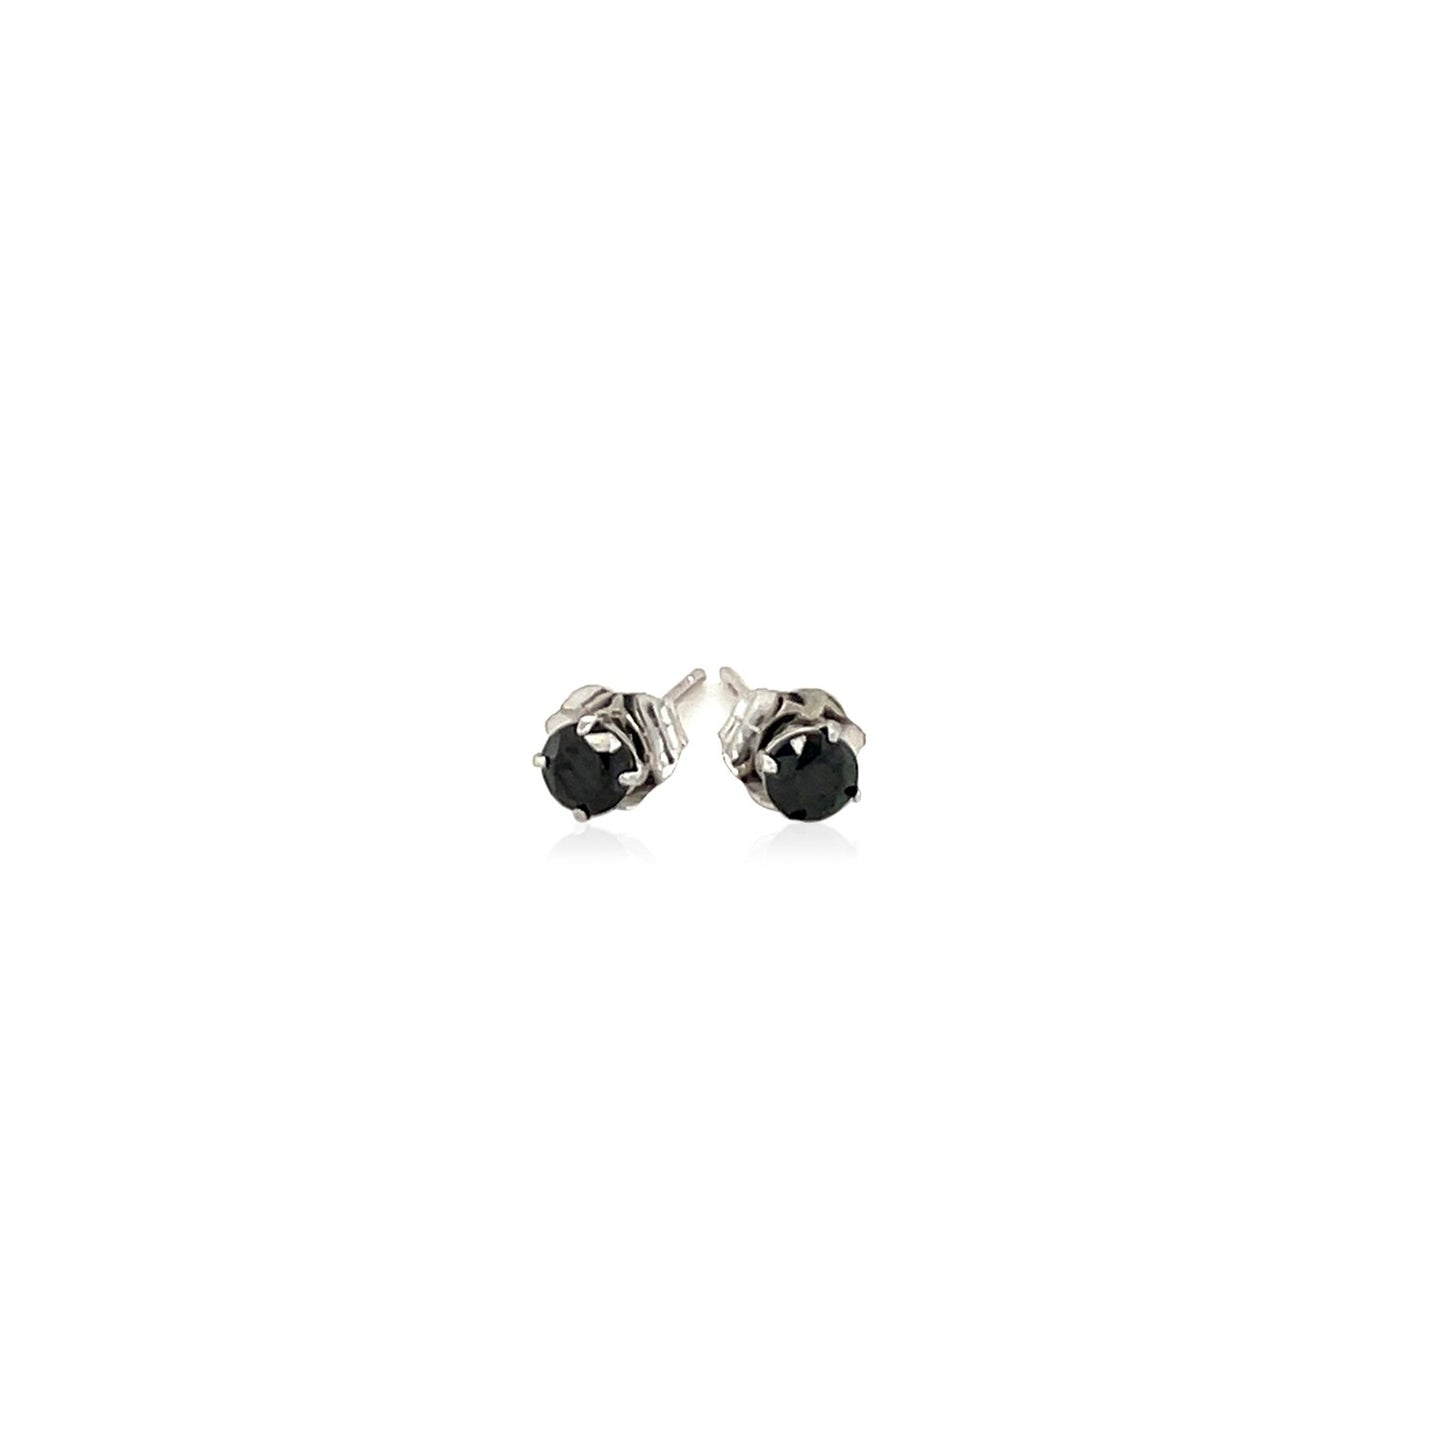 14k White Gold Black 3mm Faceted Cubic Zirconia Stud Earrings